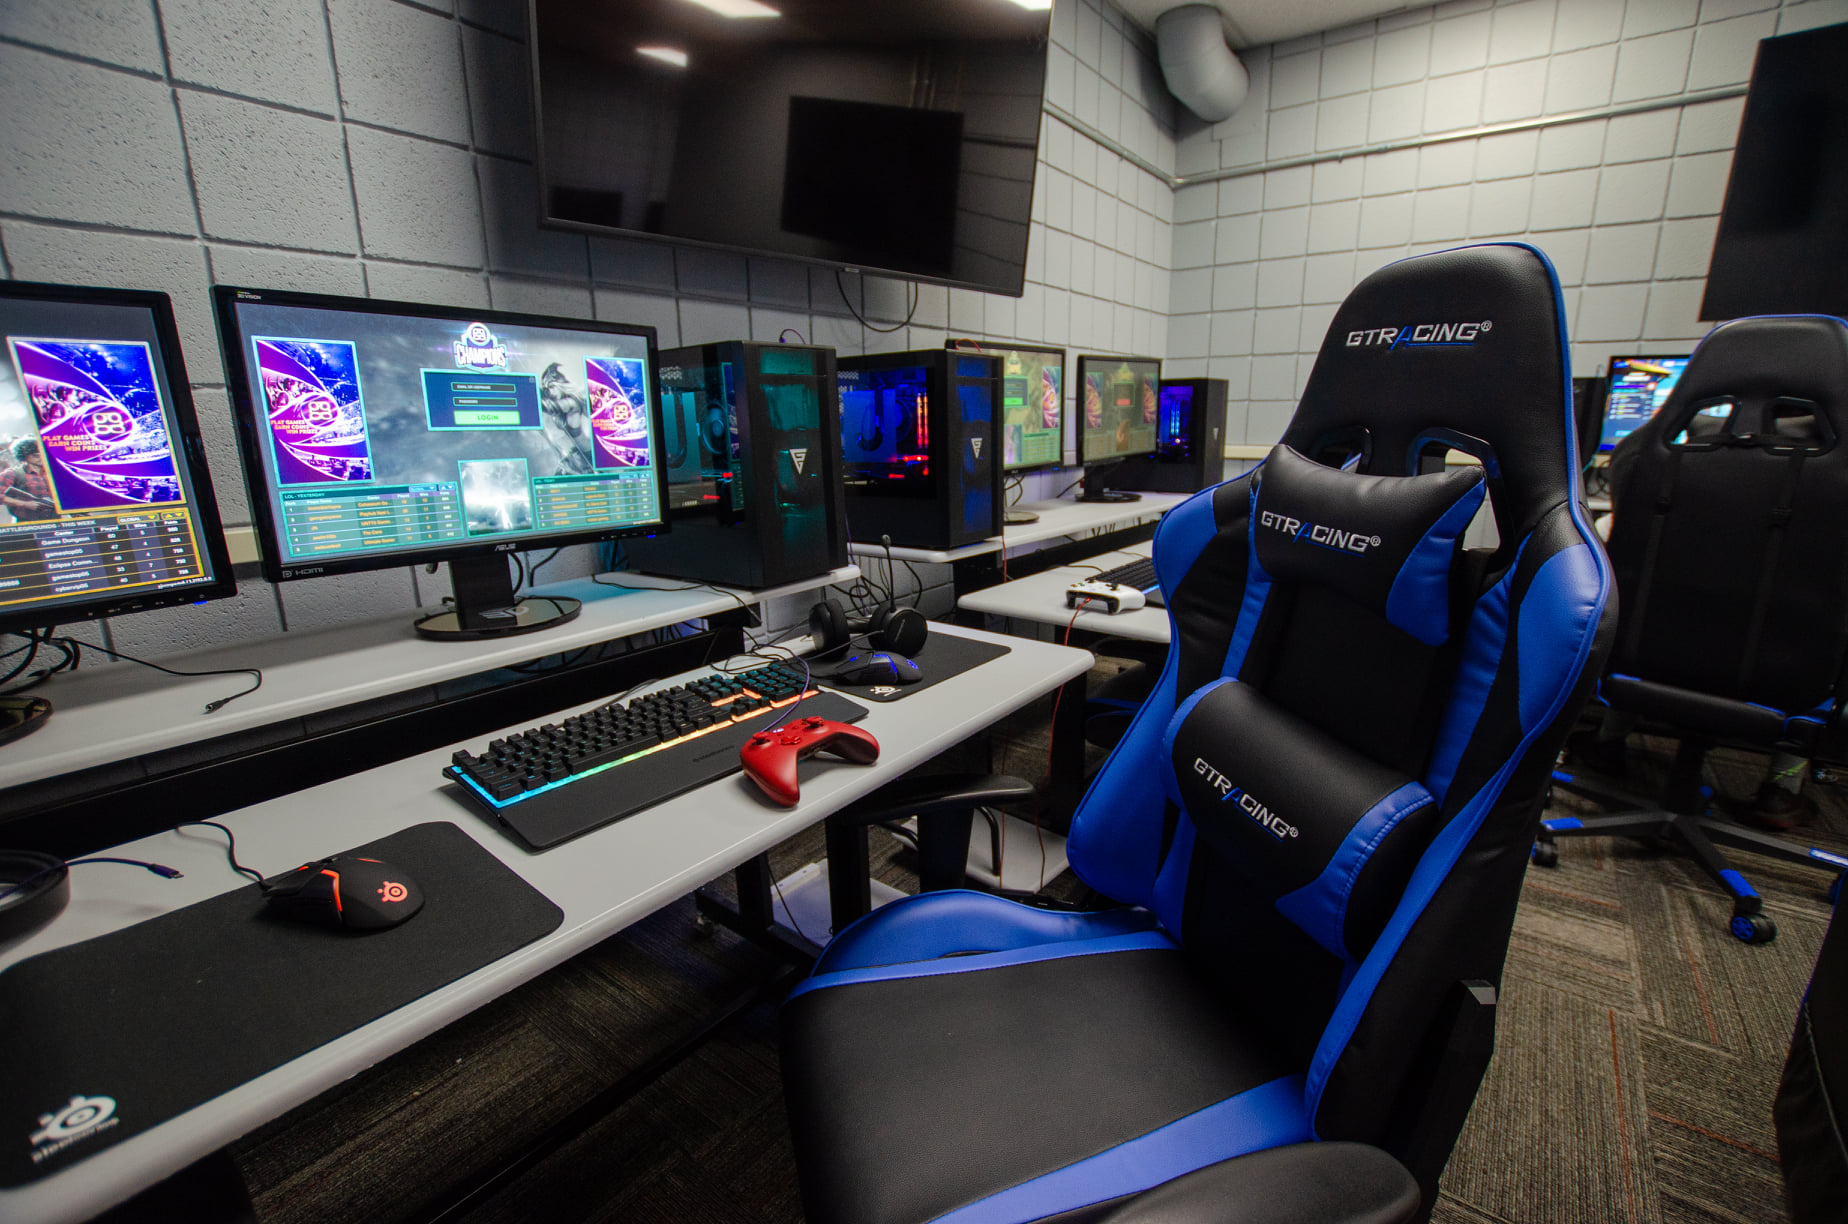 Jewish Community Center of Youngstown has a venue for esports gamers in their community